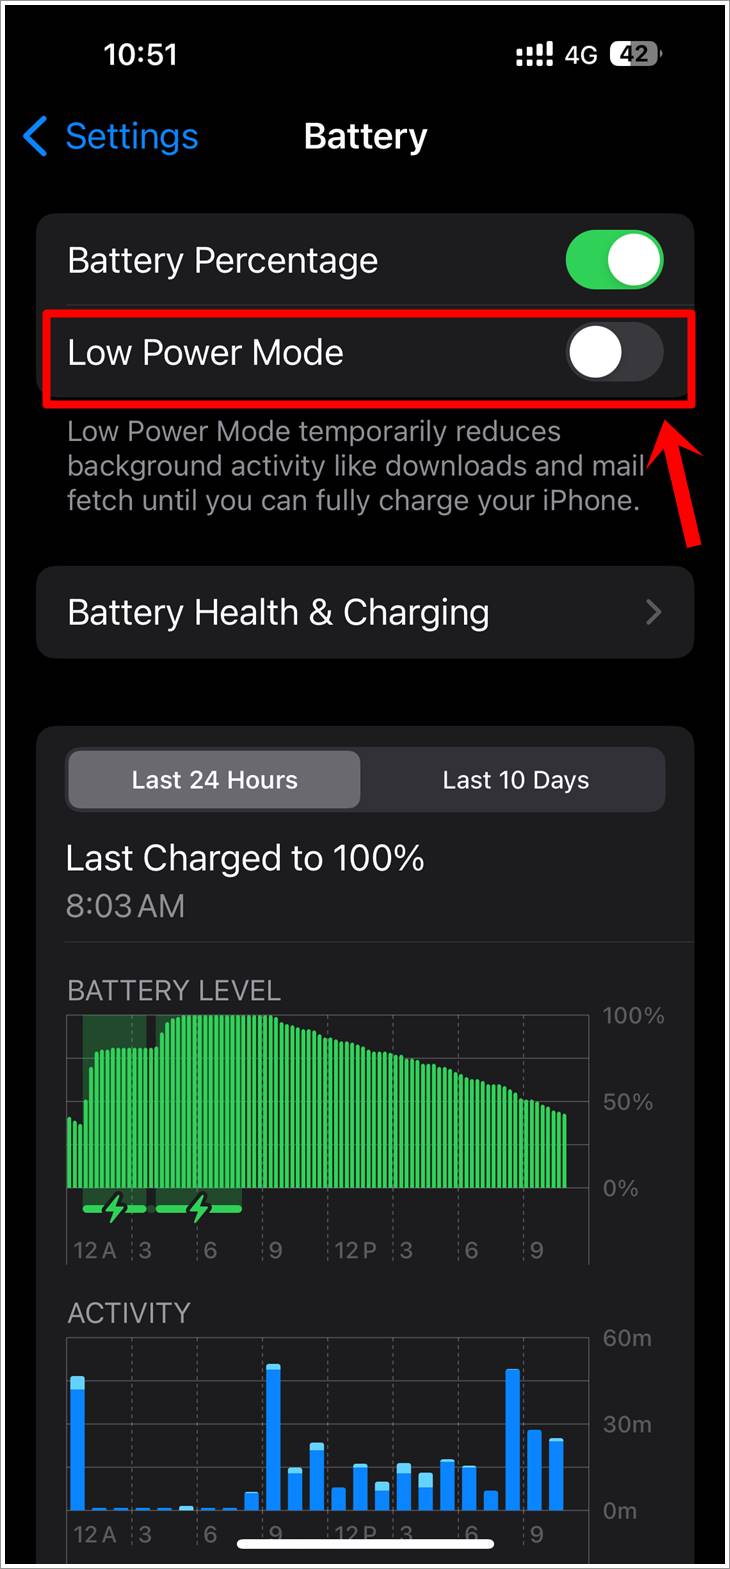 Fix WhatsApp Not Receiving Messages: This is a screenshot of the 'Battery' page of an iPhone. The 'Low Power Mode' option is toggled off and highlighted.